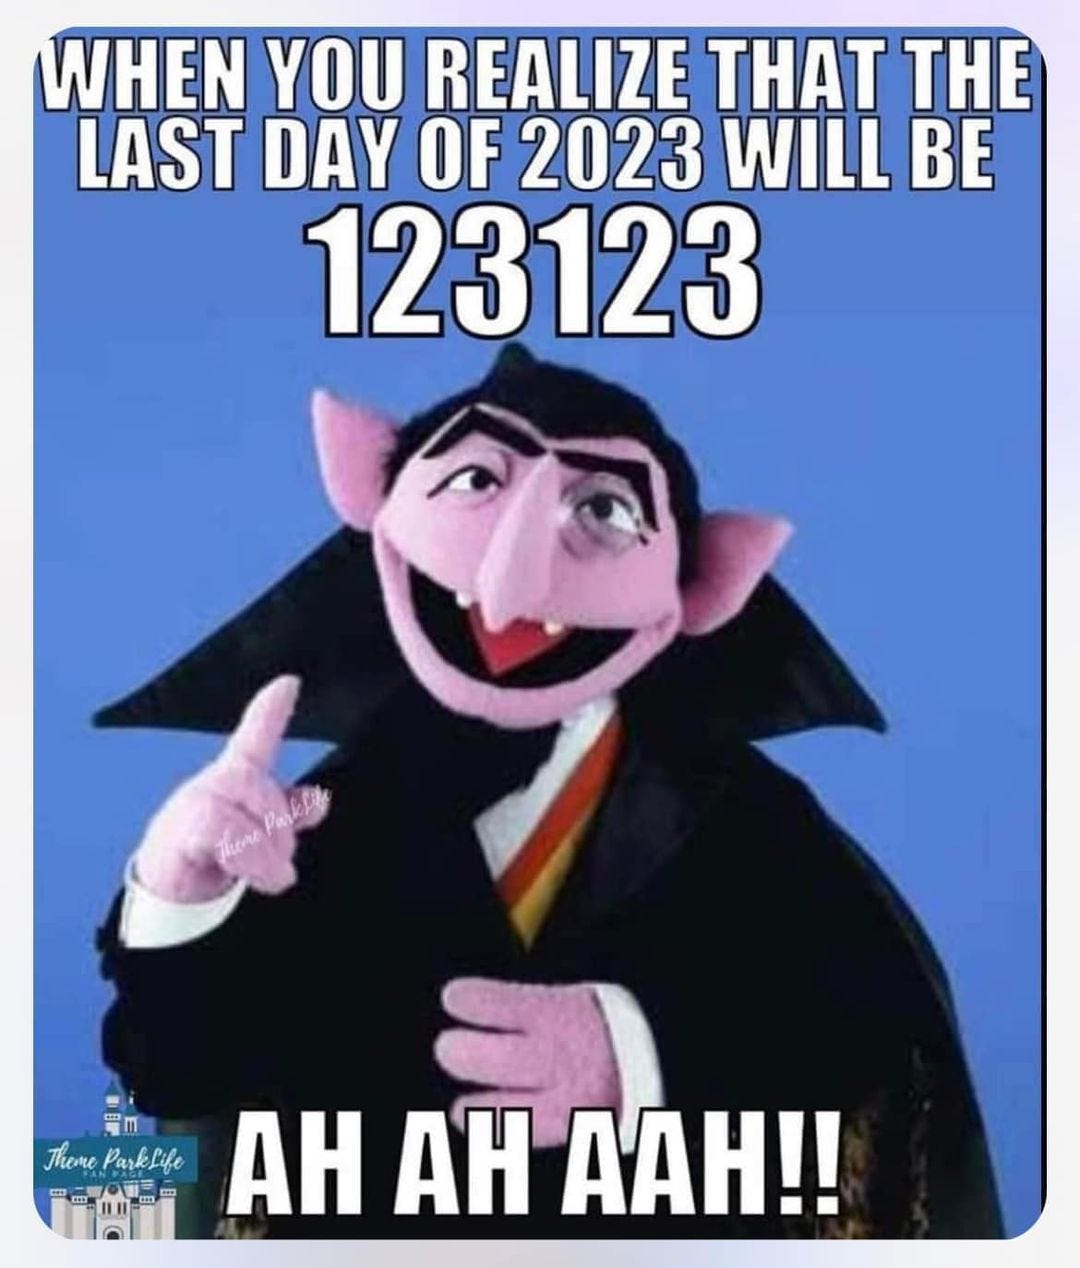 May be a meme of text that says 'WHEN YOU REALIZE THAT THE LAST DAY OF 2023 WILL BE 123123 買m Theme Parklife . A A m AH AH AAH!!'